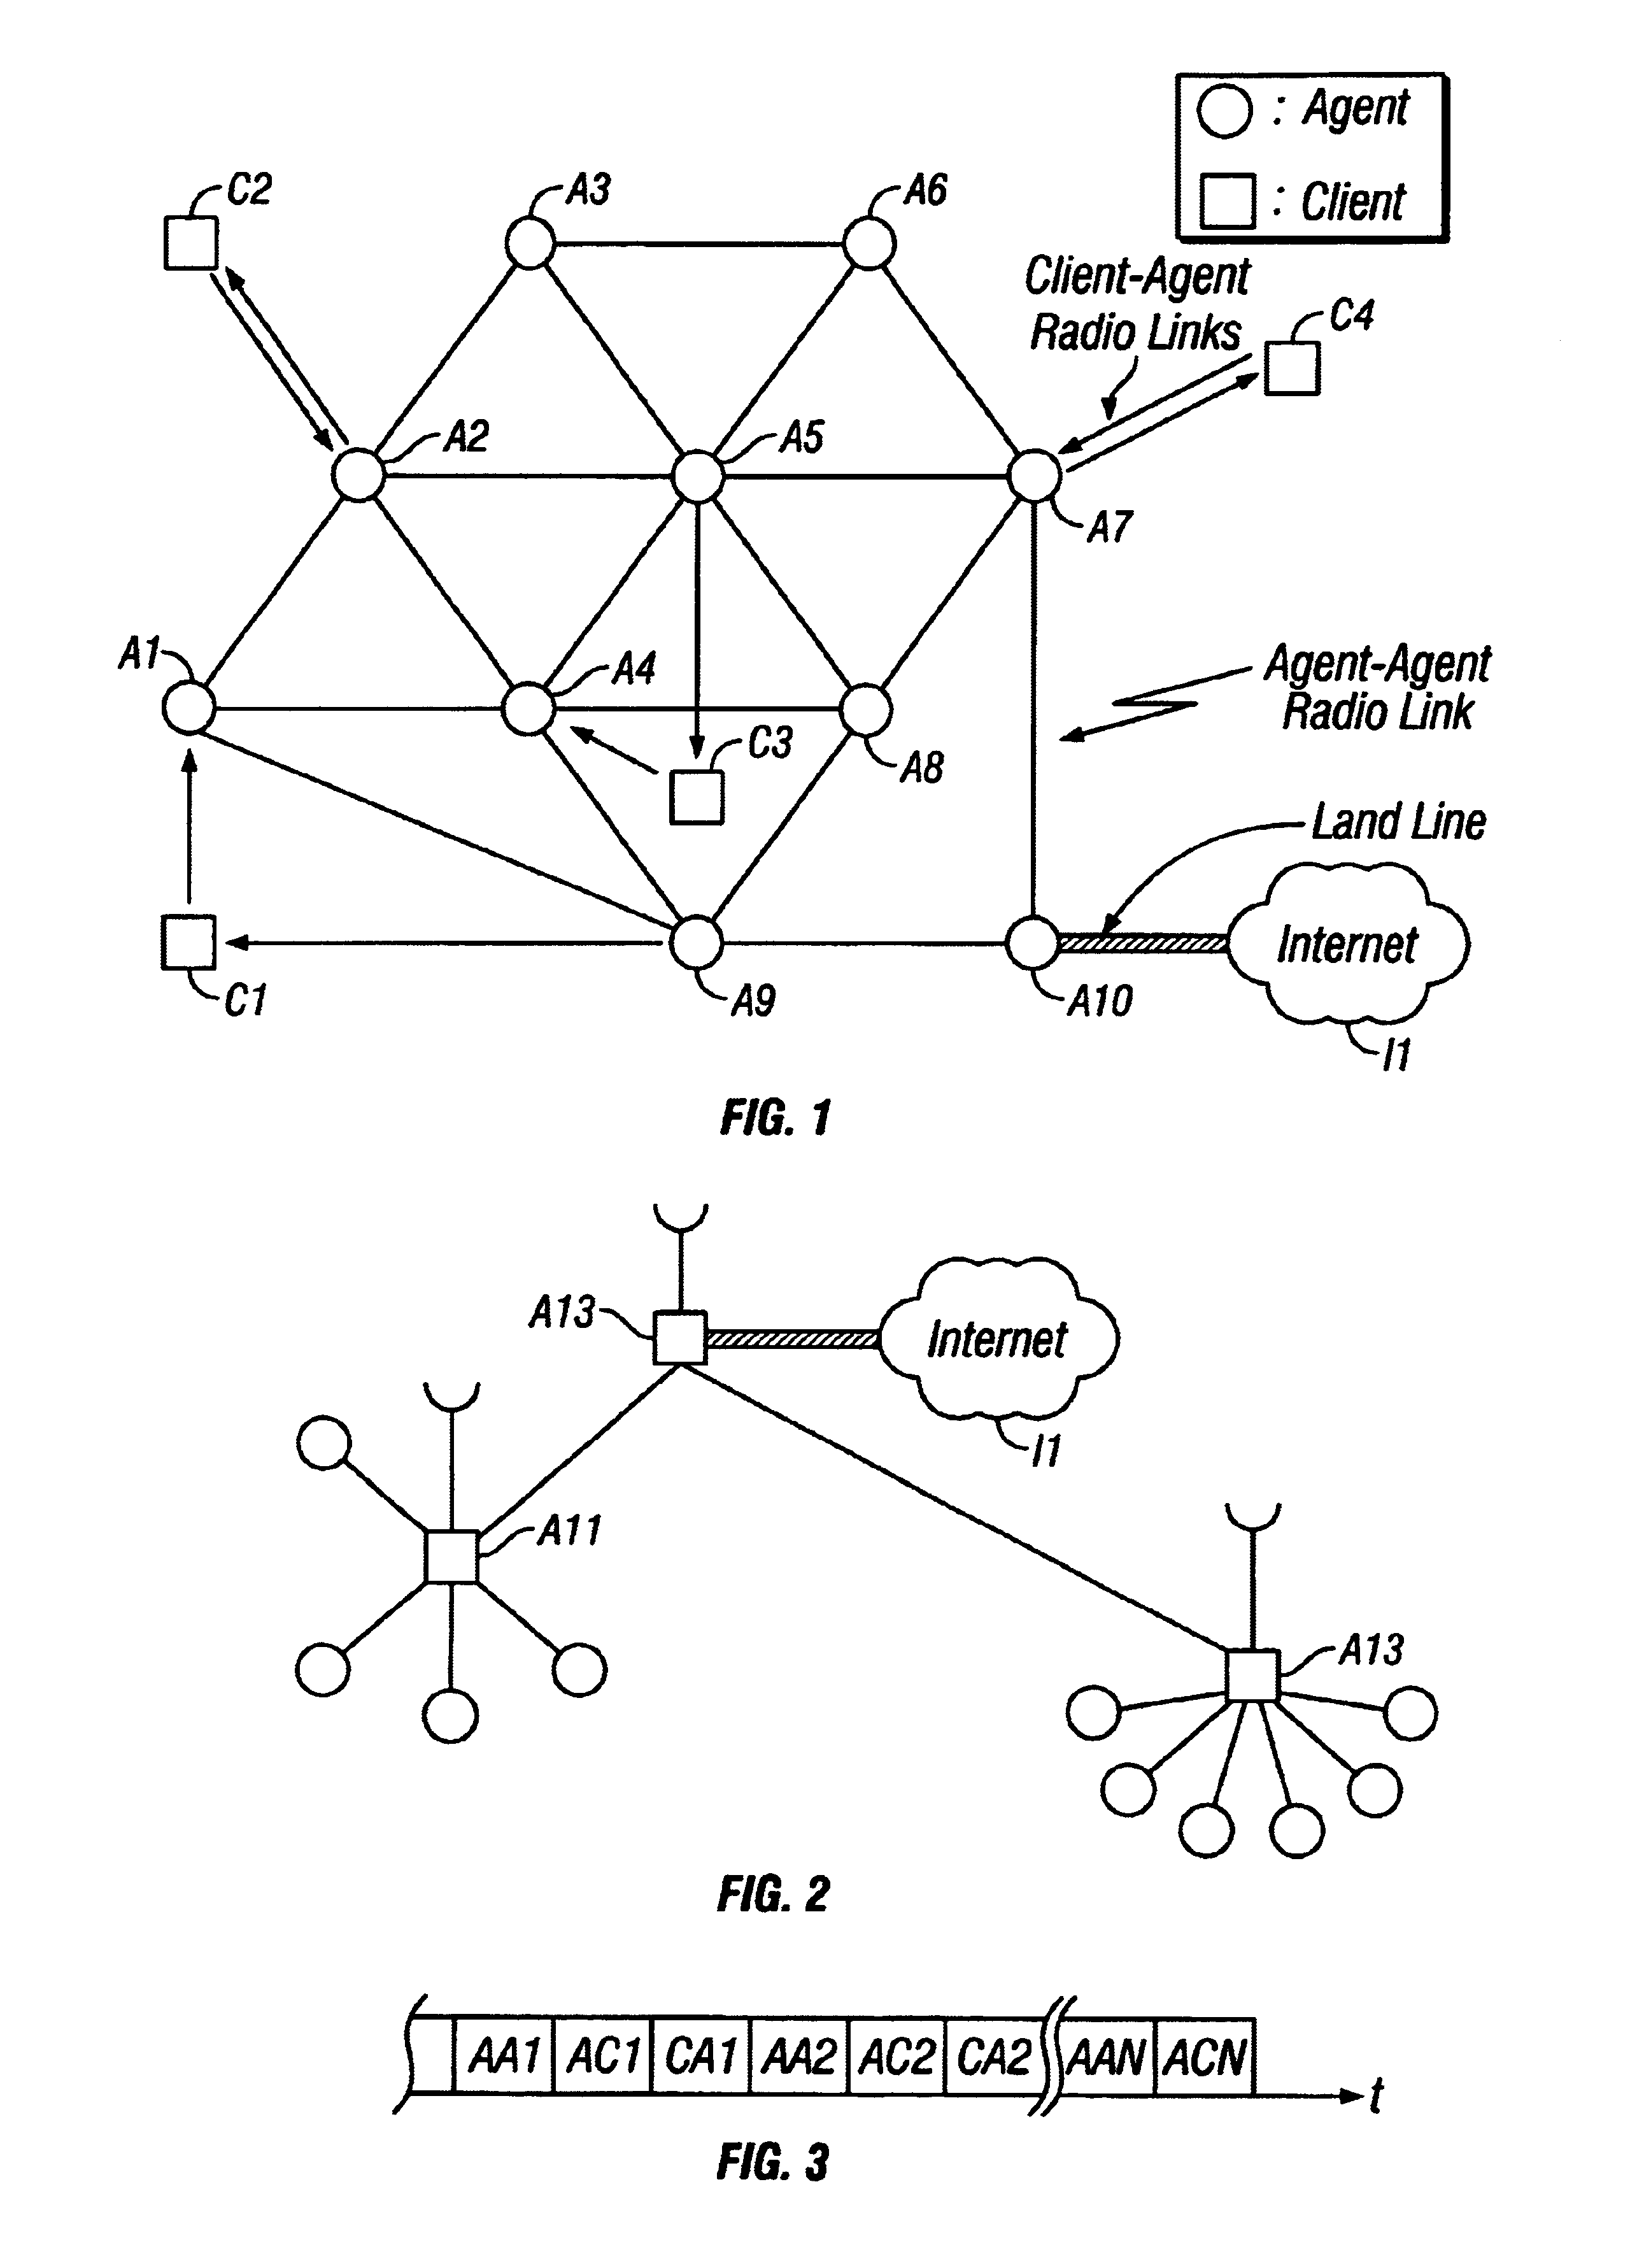 Power- and bandwidth-adaptive in-home wireless communications system with power-grid-powered agents and battery-powered clients